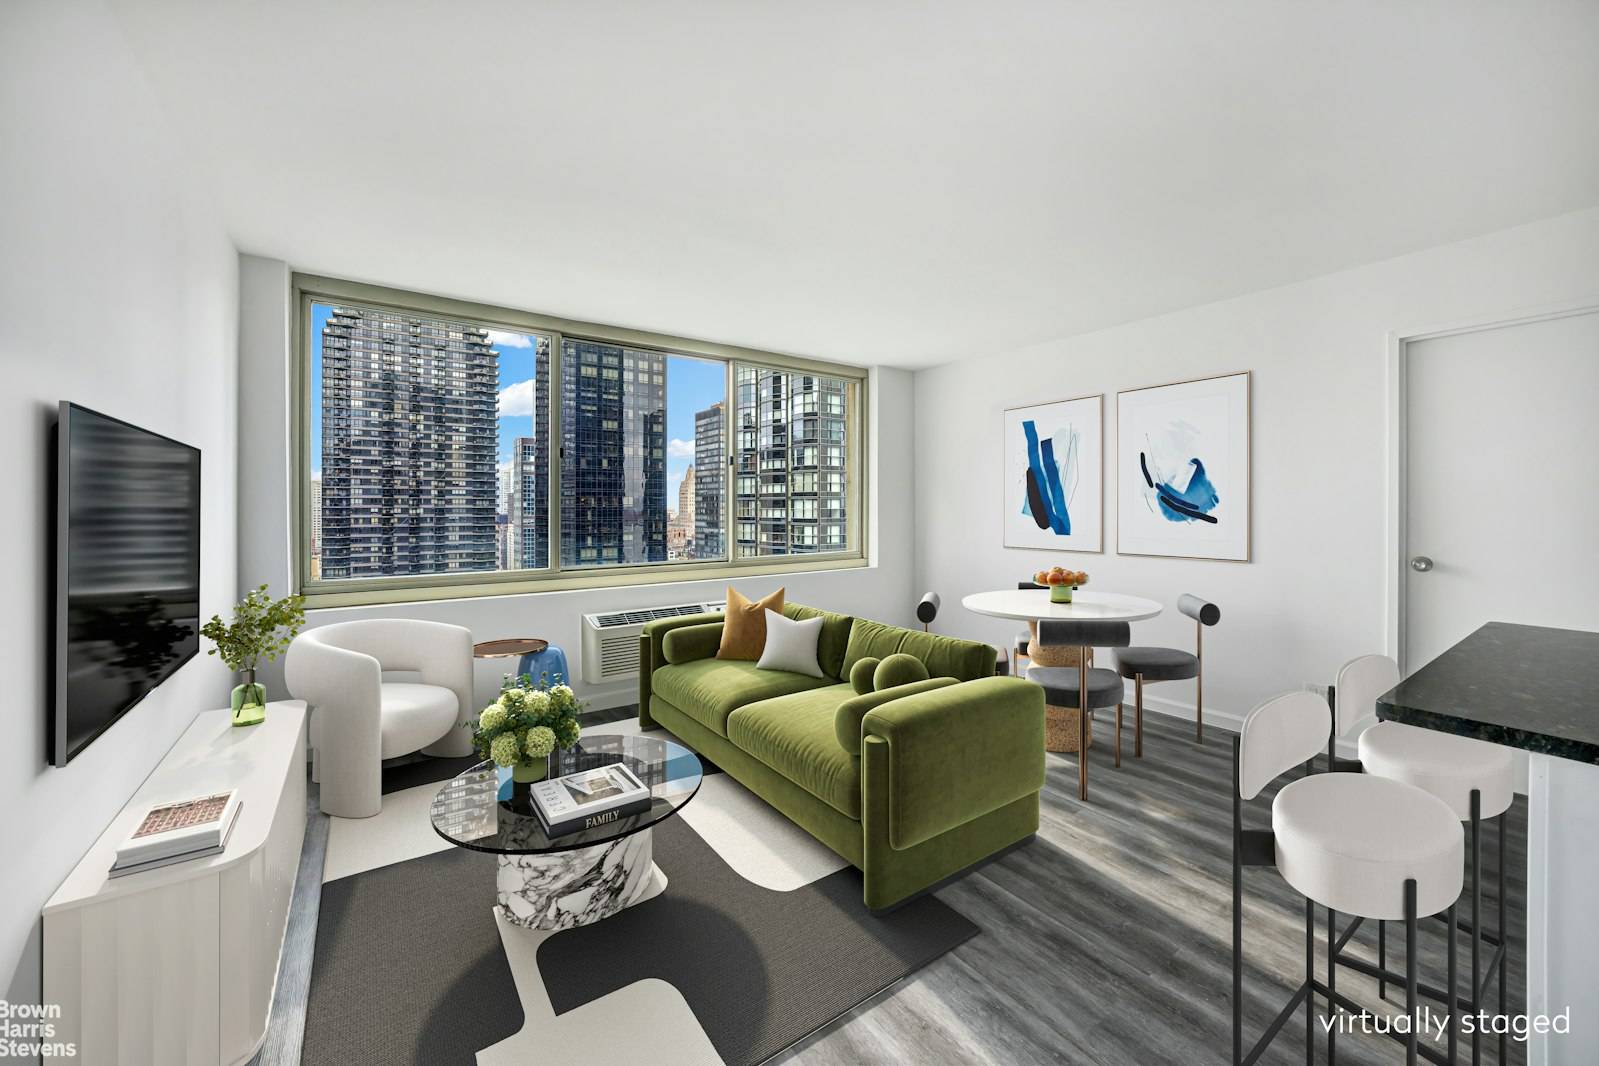 Introducing an elegant condominium unit perfectly positioned at 333 East 45th Street, showcasing an exquisite blend of style and comfort.